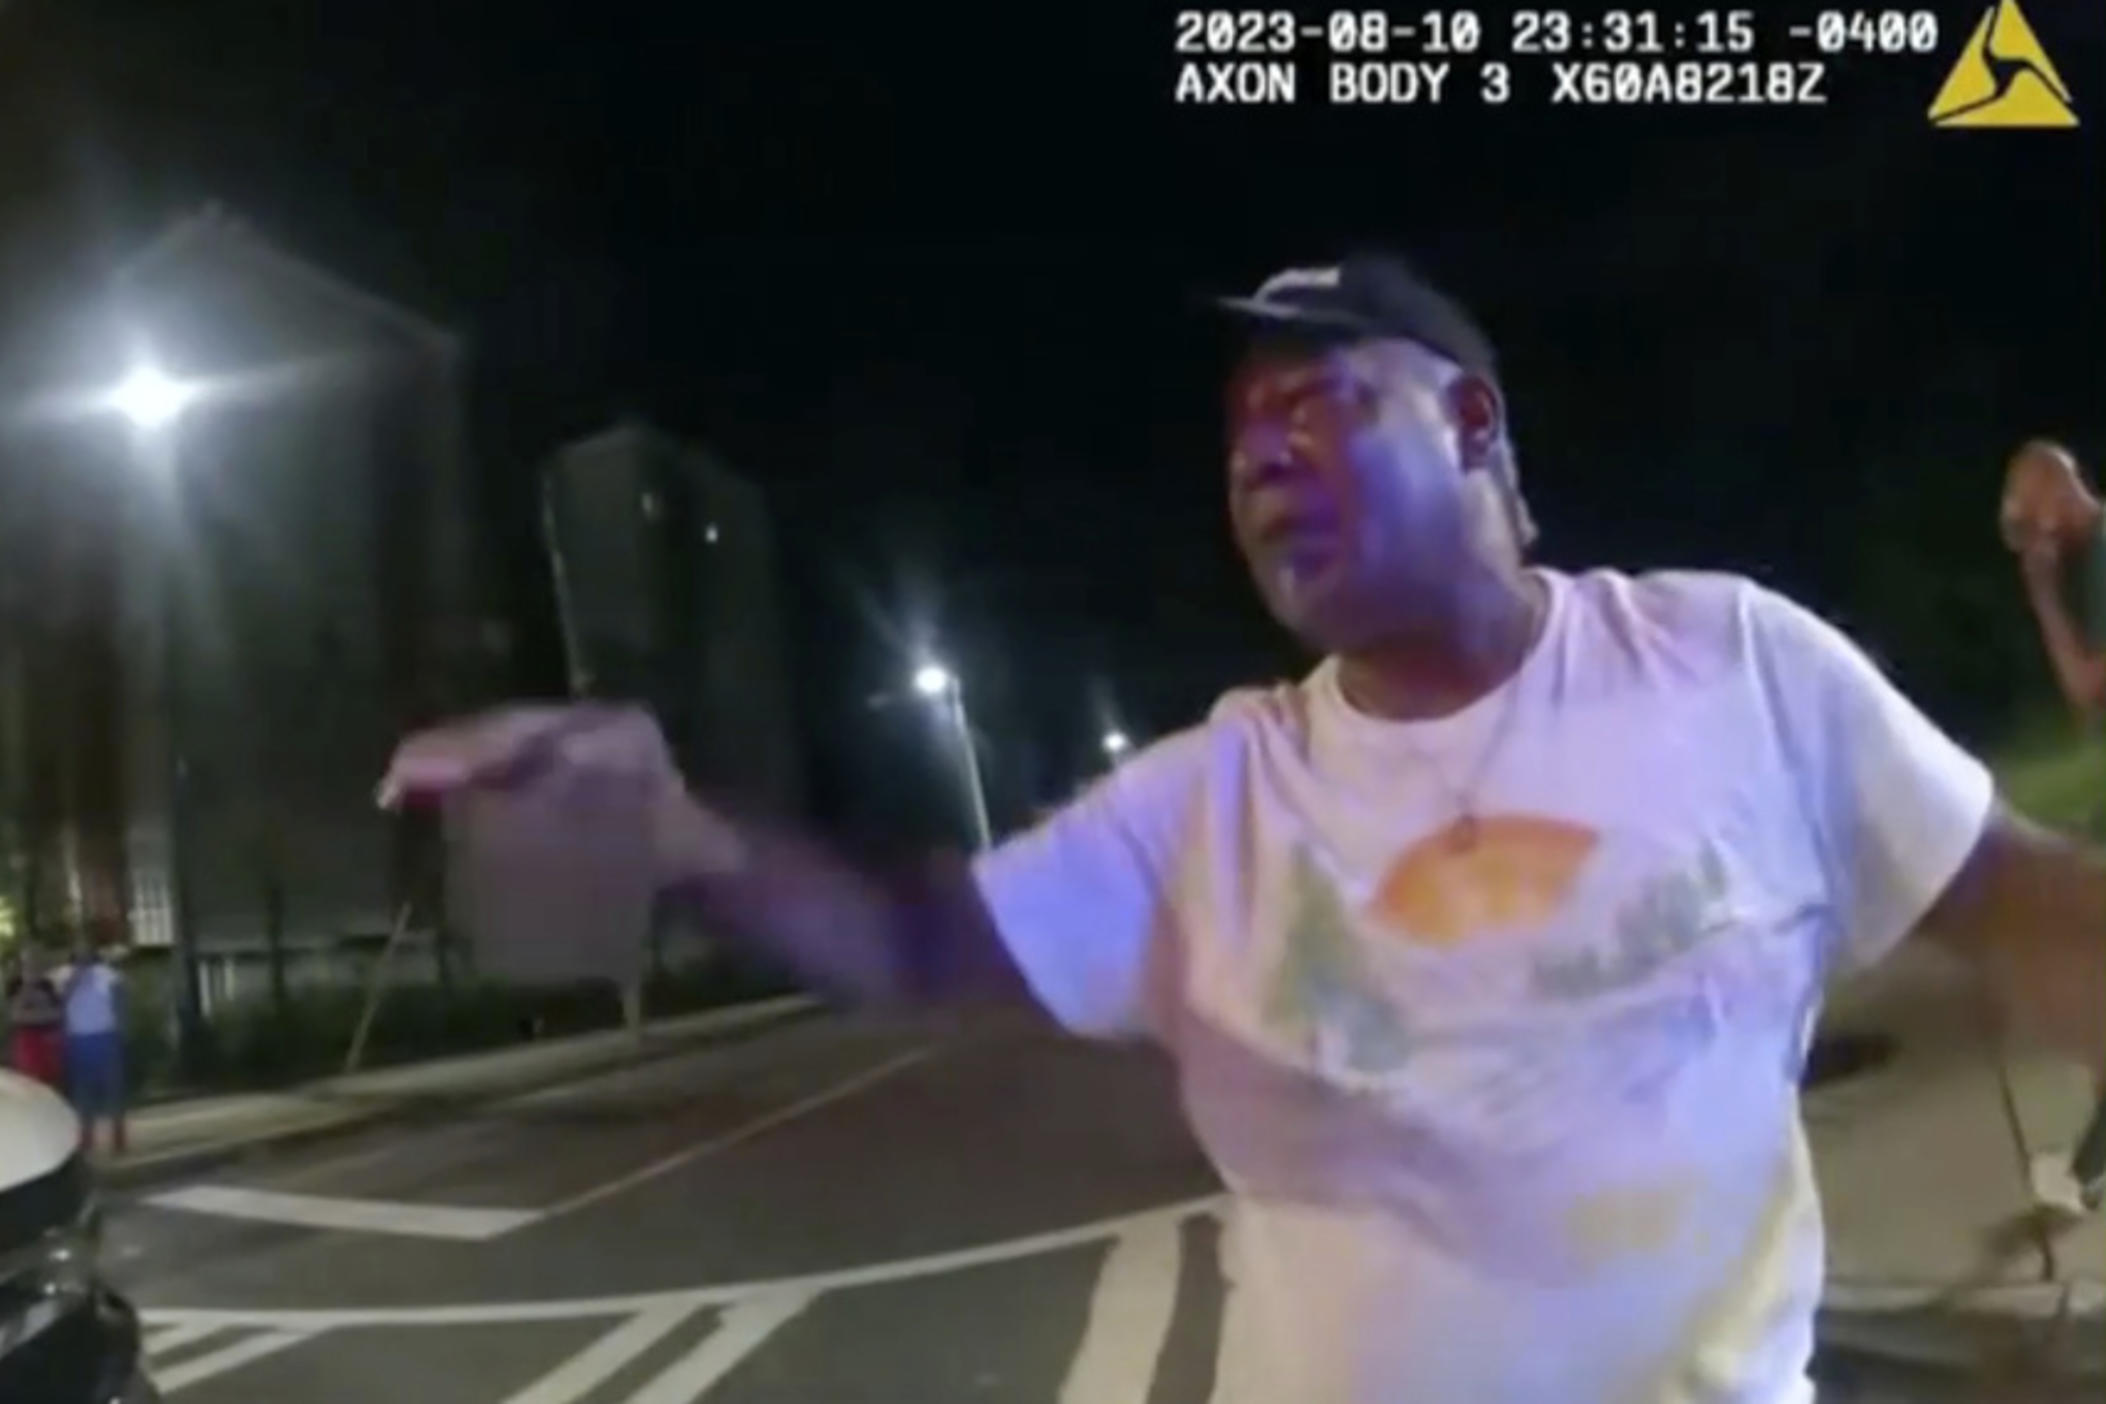 This image from bodycam video provided by the Atlanta Police Department shows Johnny Hollman Sr. speaking with Officer Kiran Kimbrough on Aug. 10, 2023 in Atlanta. The police officer responding to a minor car crash deployed a Taser on the church deacon who disregarded multiple commands to sign a traffic ticket, shocking the man after he repeatedly said he could not breathe, police body camera video released Wednesday, Nov. 22, 2023 shows. Hollman Sr. became unresponsive during his arrest and later died.